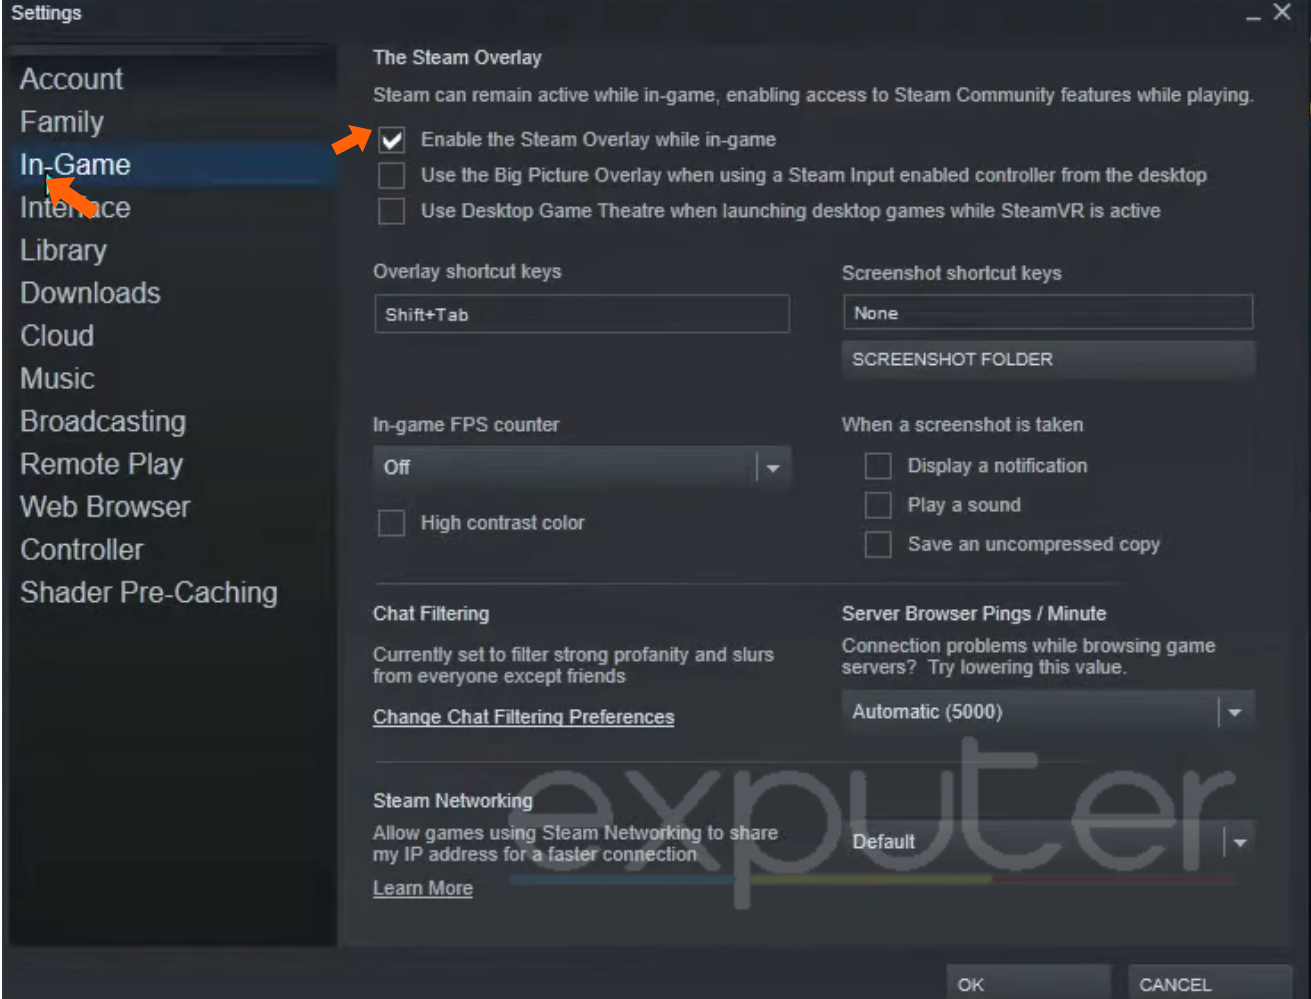 Disabling the In-Game Overlay in Steam